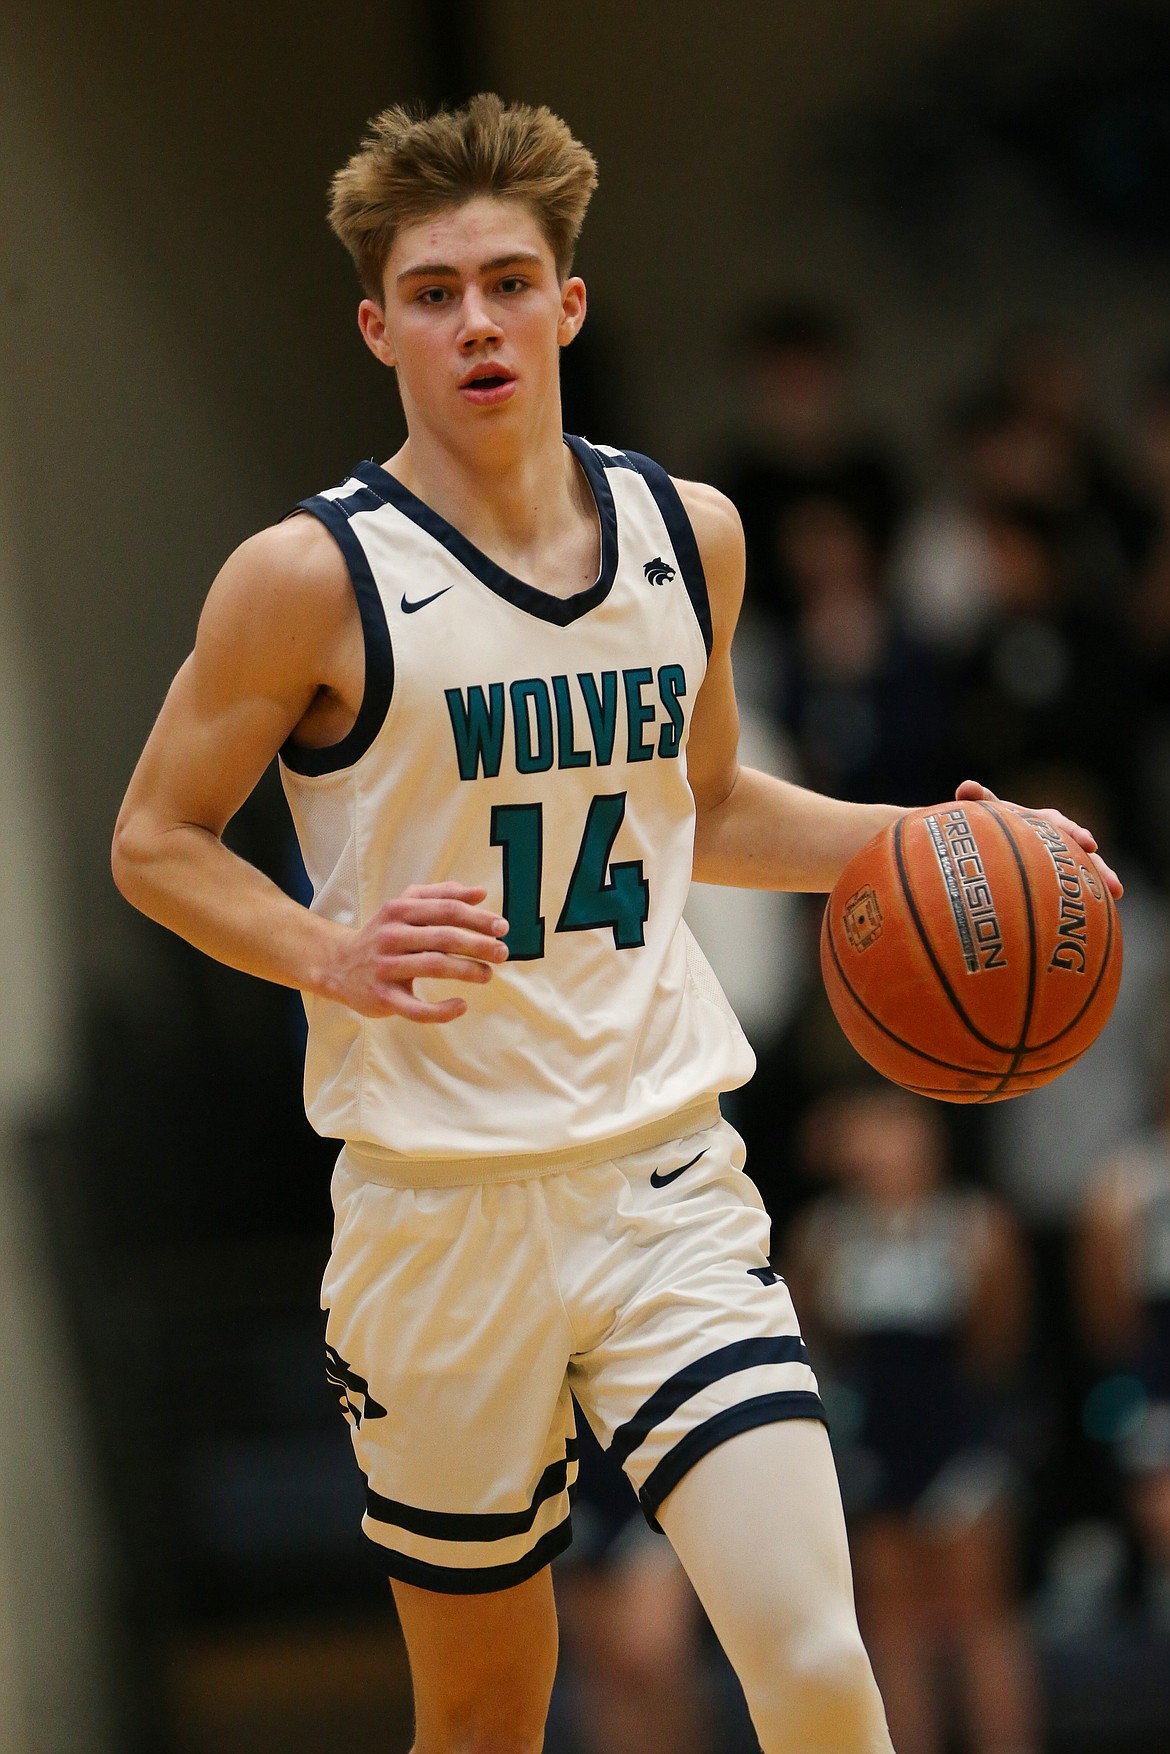 JASON DUCHOW PHOTOGRAPHY
Lake City High senior point guard Kolton Mitchell is the school's career leader in points, assists, steals, 3-pointers ... and much more.